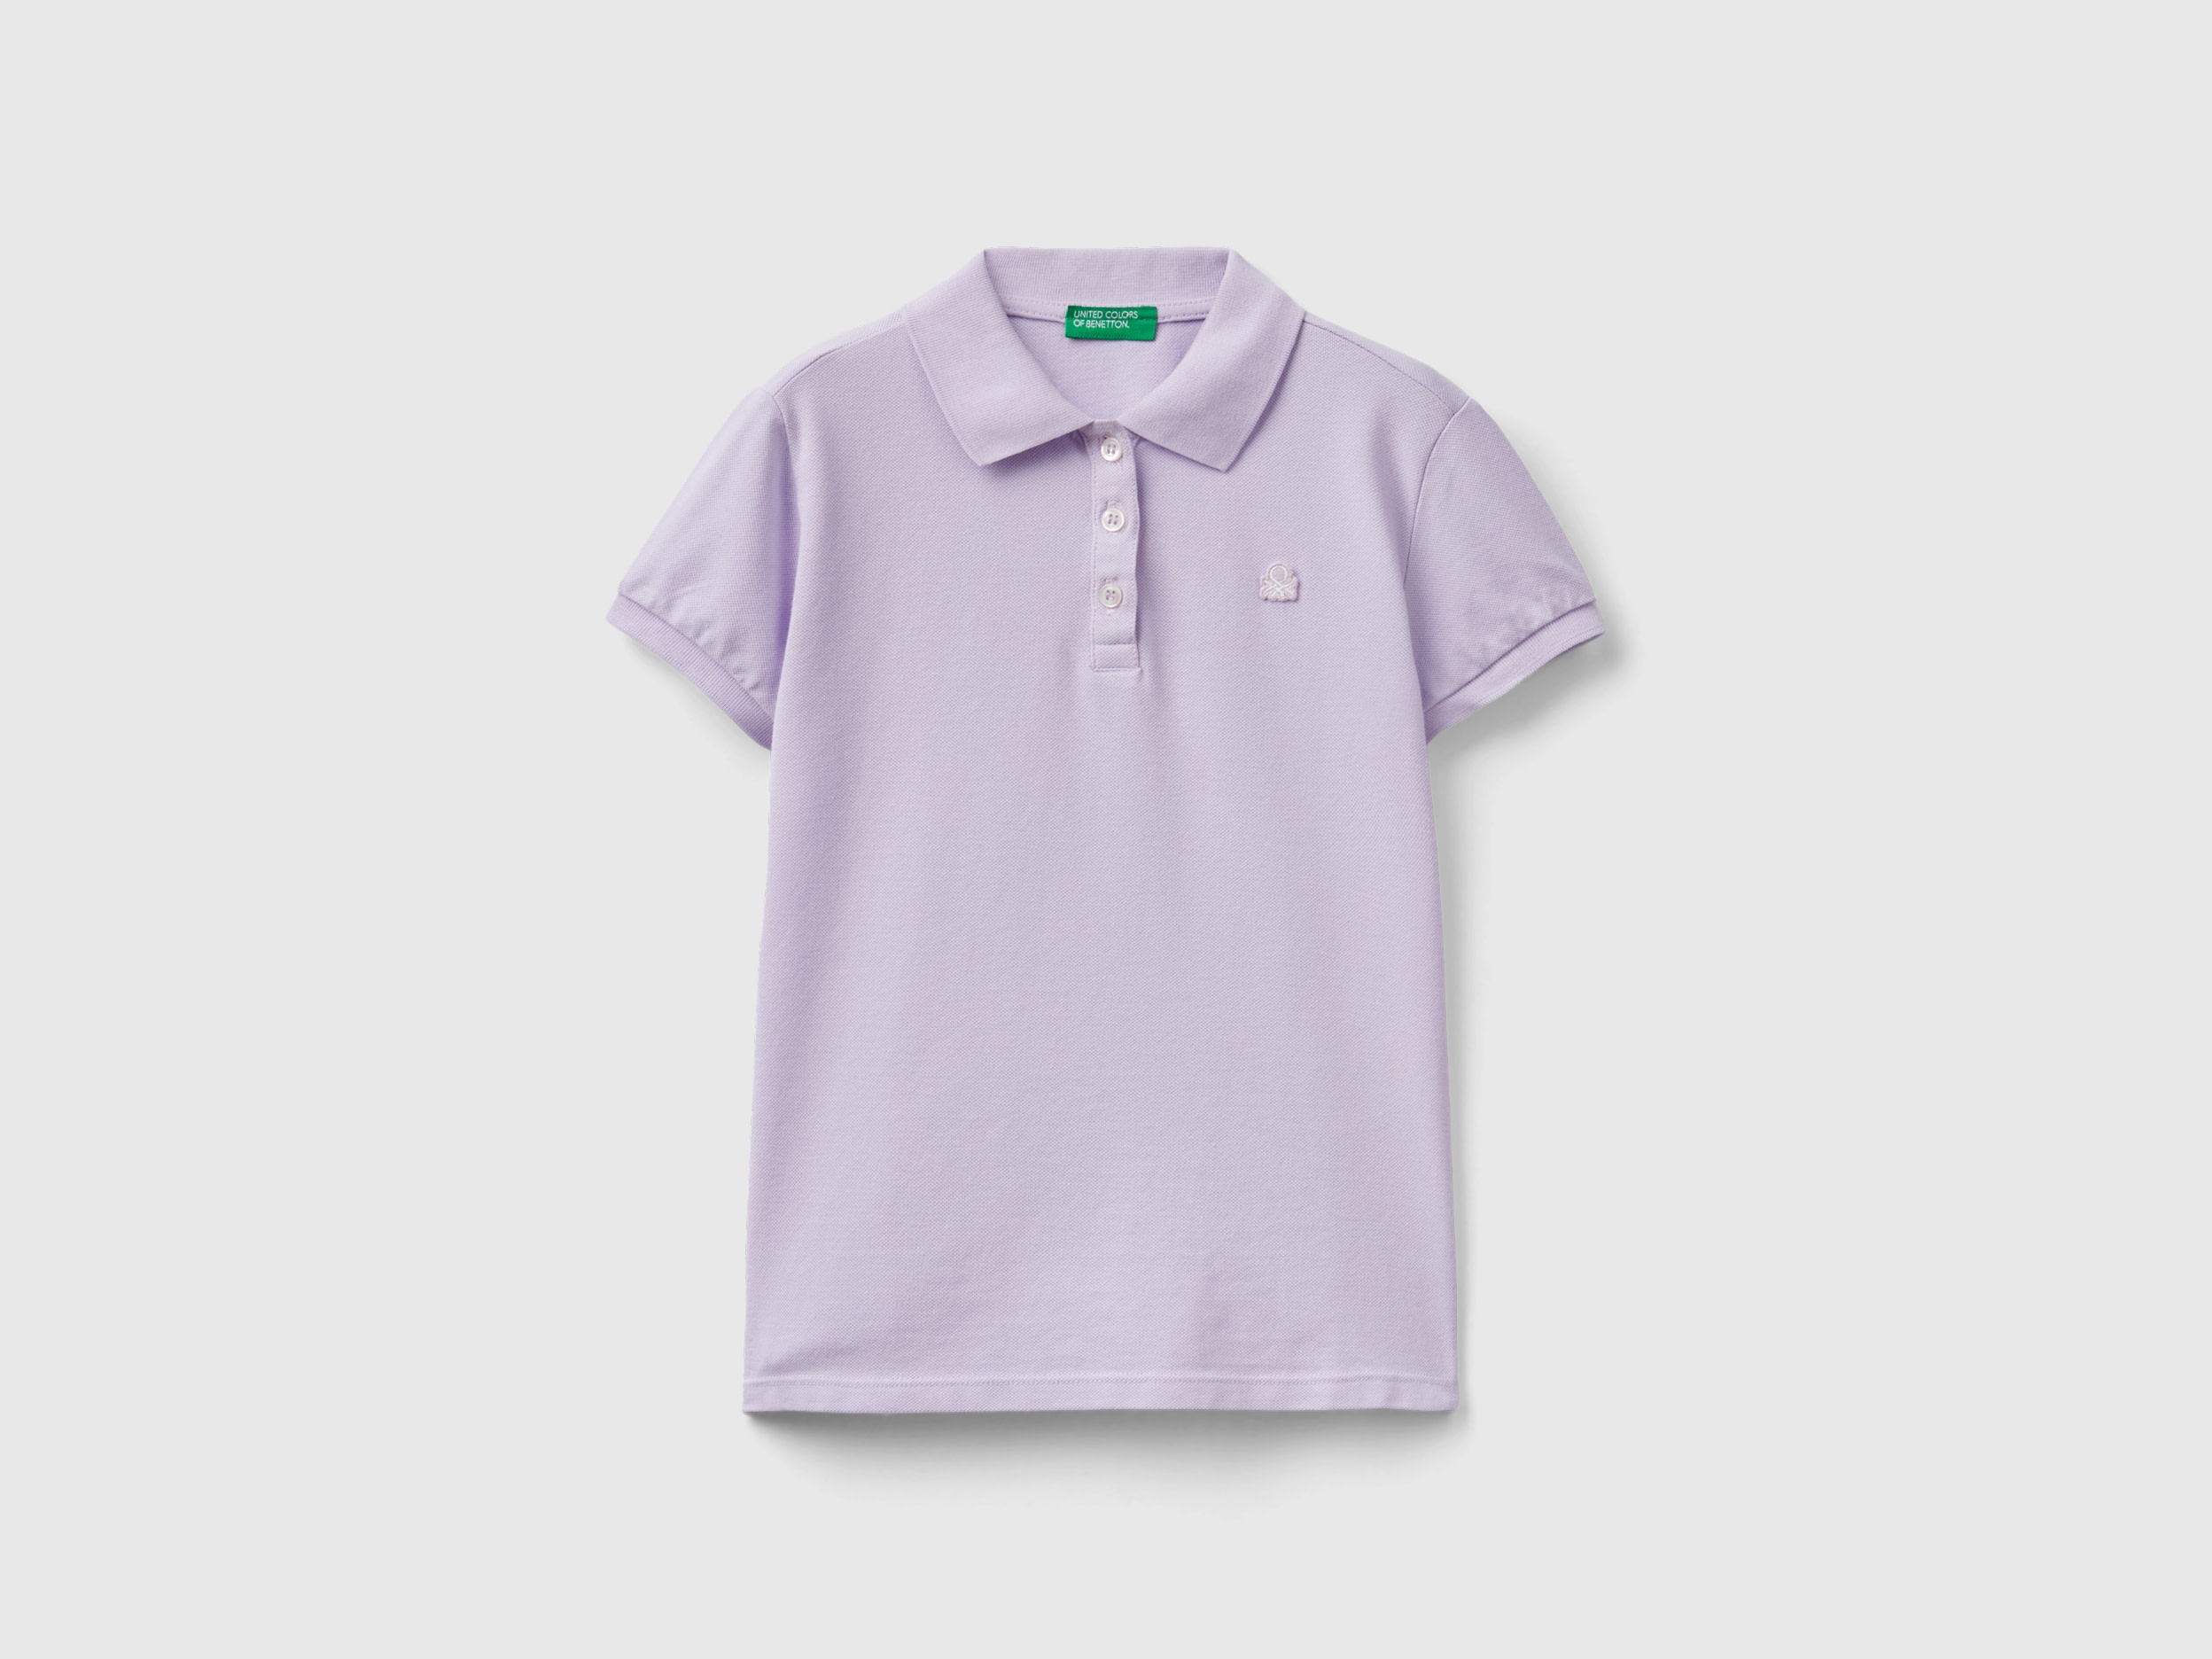 Image of Benetton, Short Sleeve Polo In Organic Cotton, size 3XL, Lilac, Kids